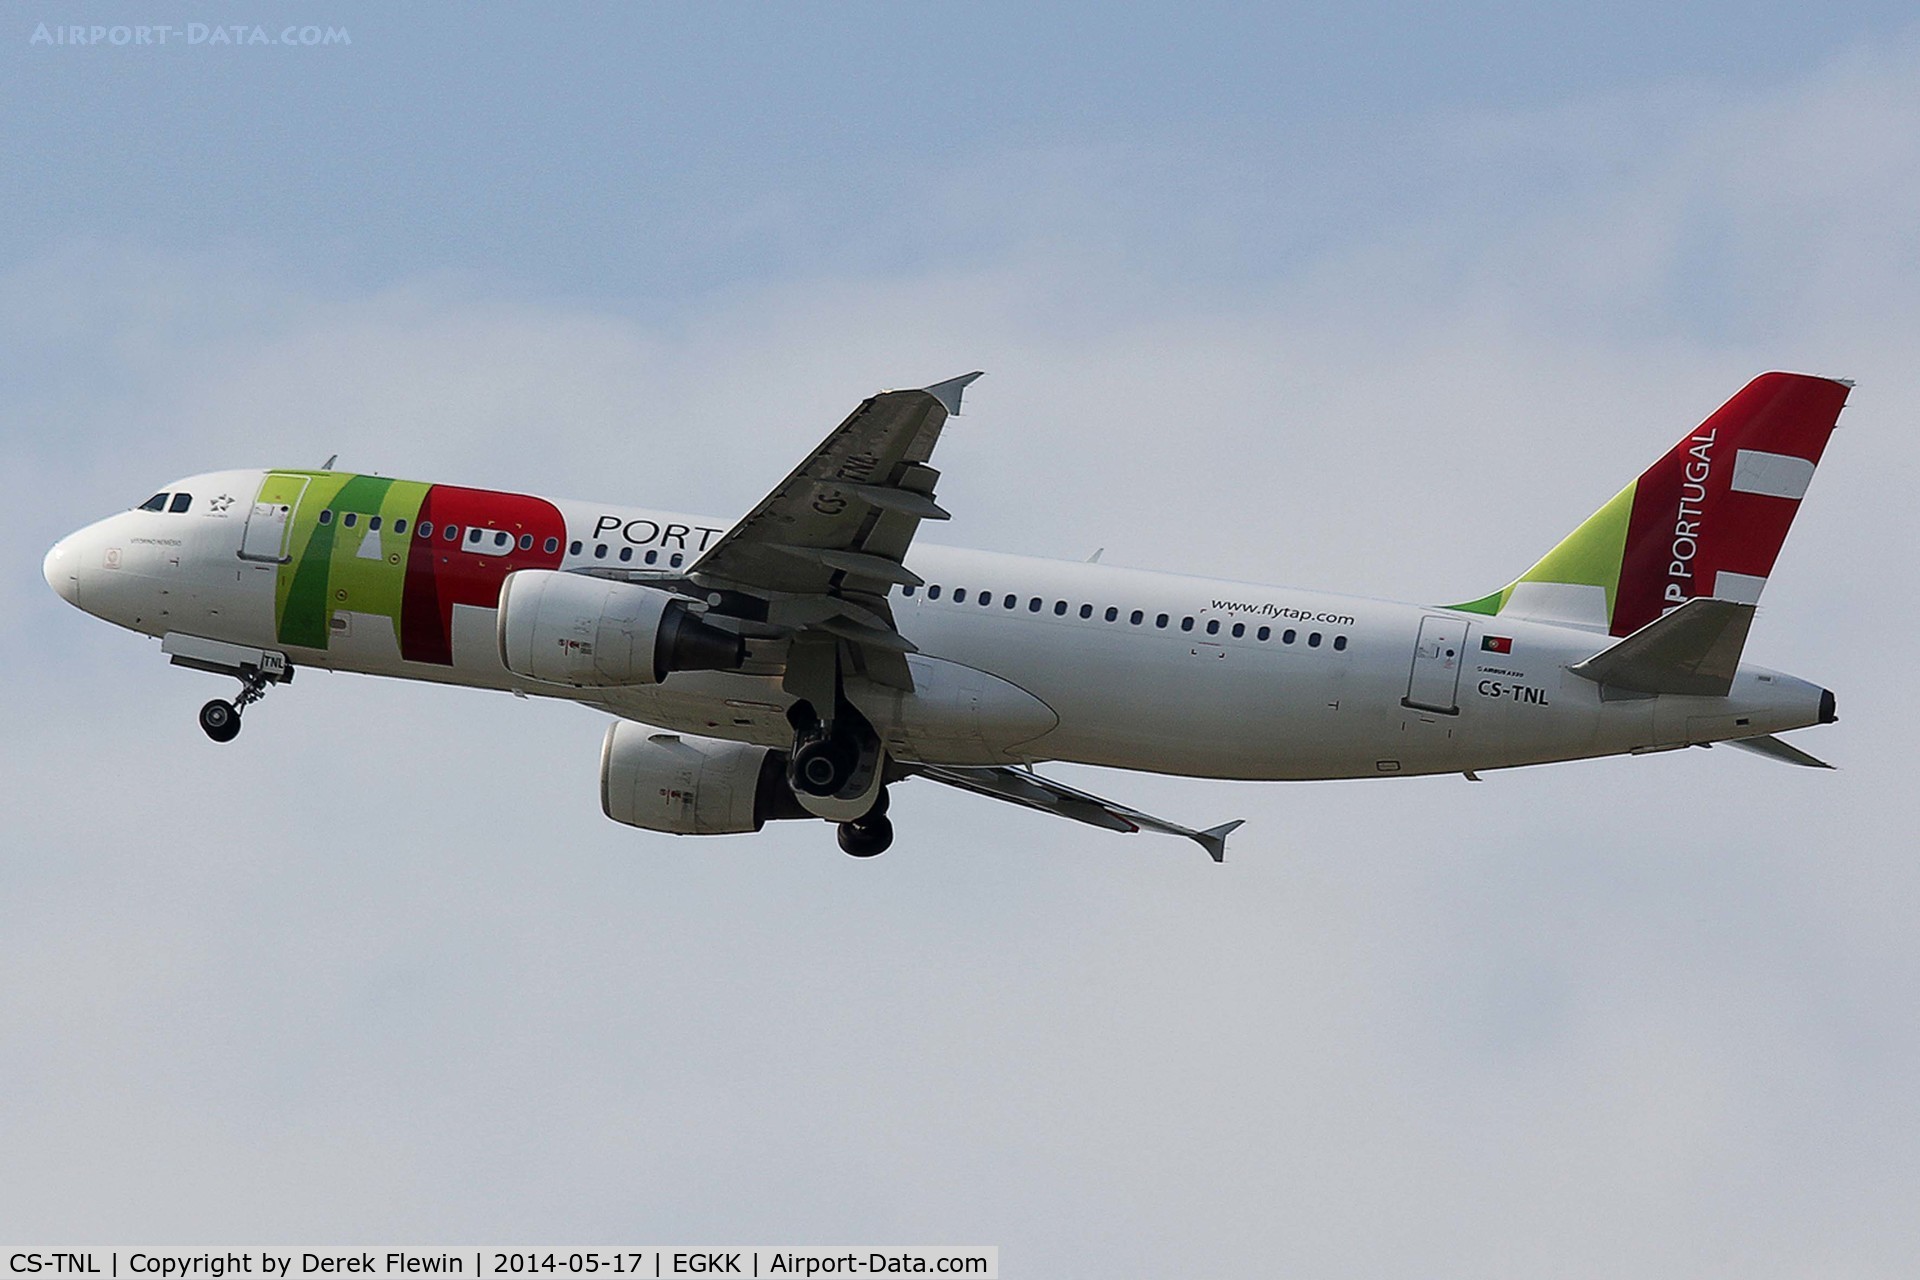 CS-TNL, 2000 Airbus A320-214 C/N 1231, Seen pulling out from runway 26R at EGKK.